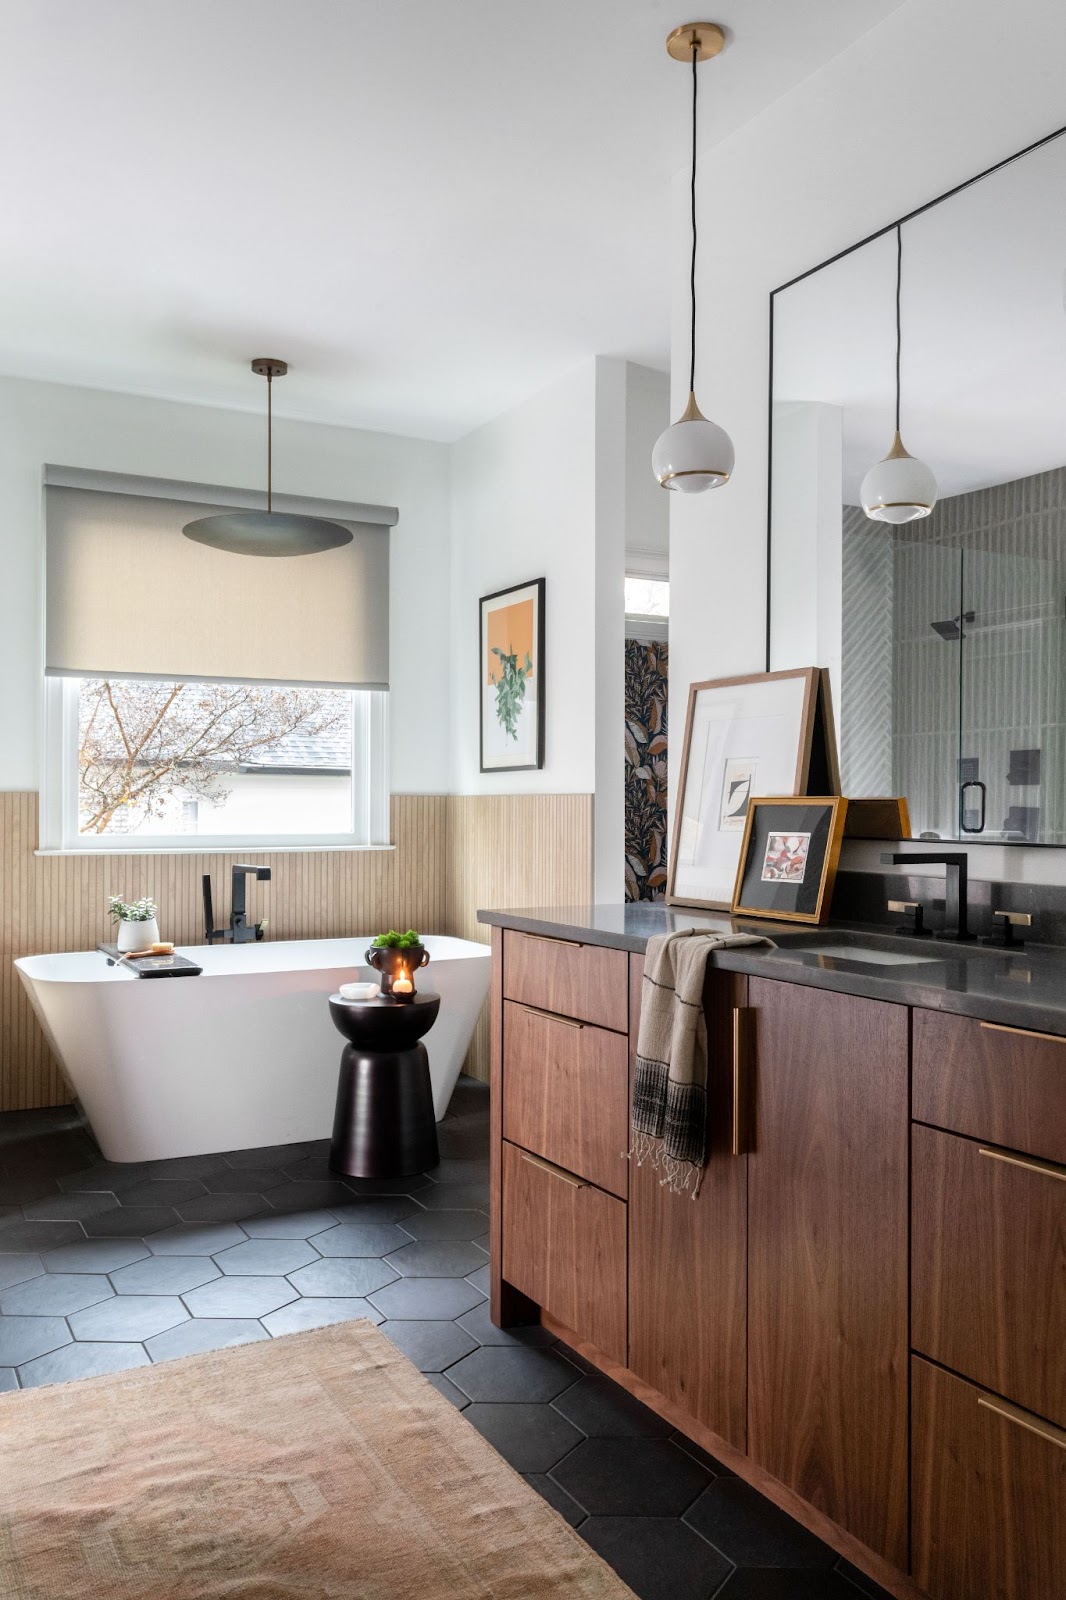 Cozy bathroom with wood cabinets, black tile flooring, white soaking tub, and artwork. 